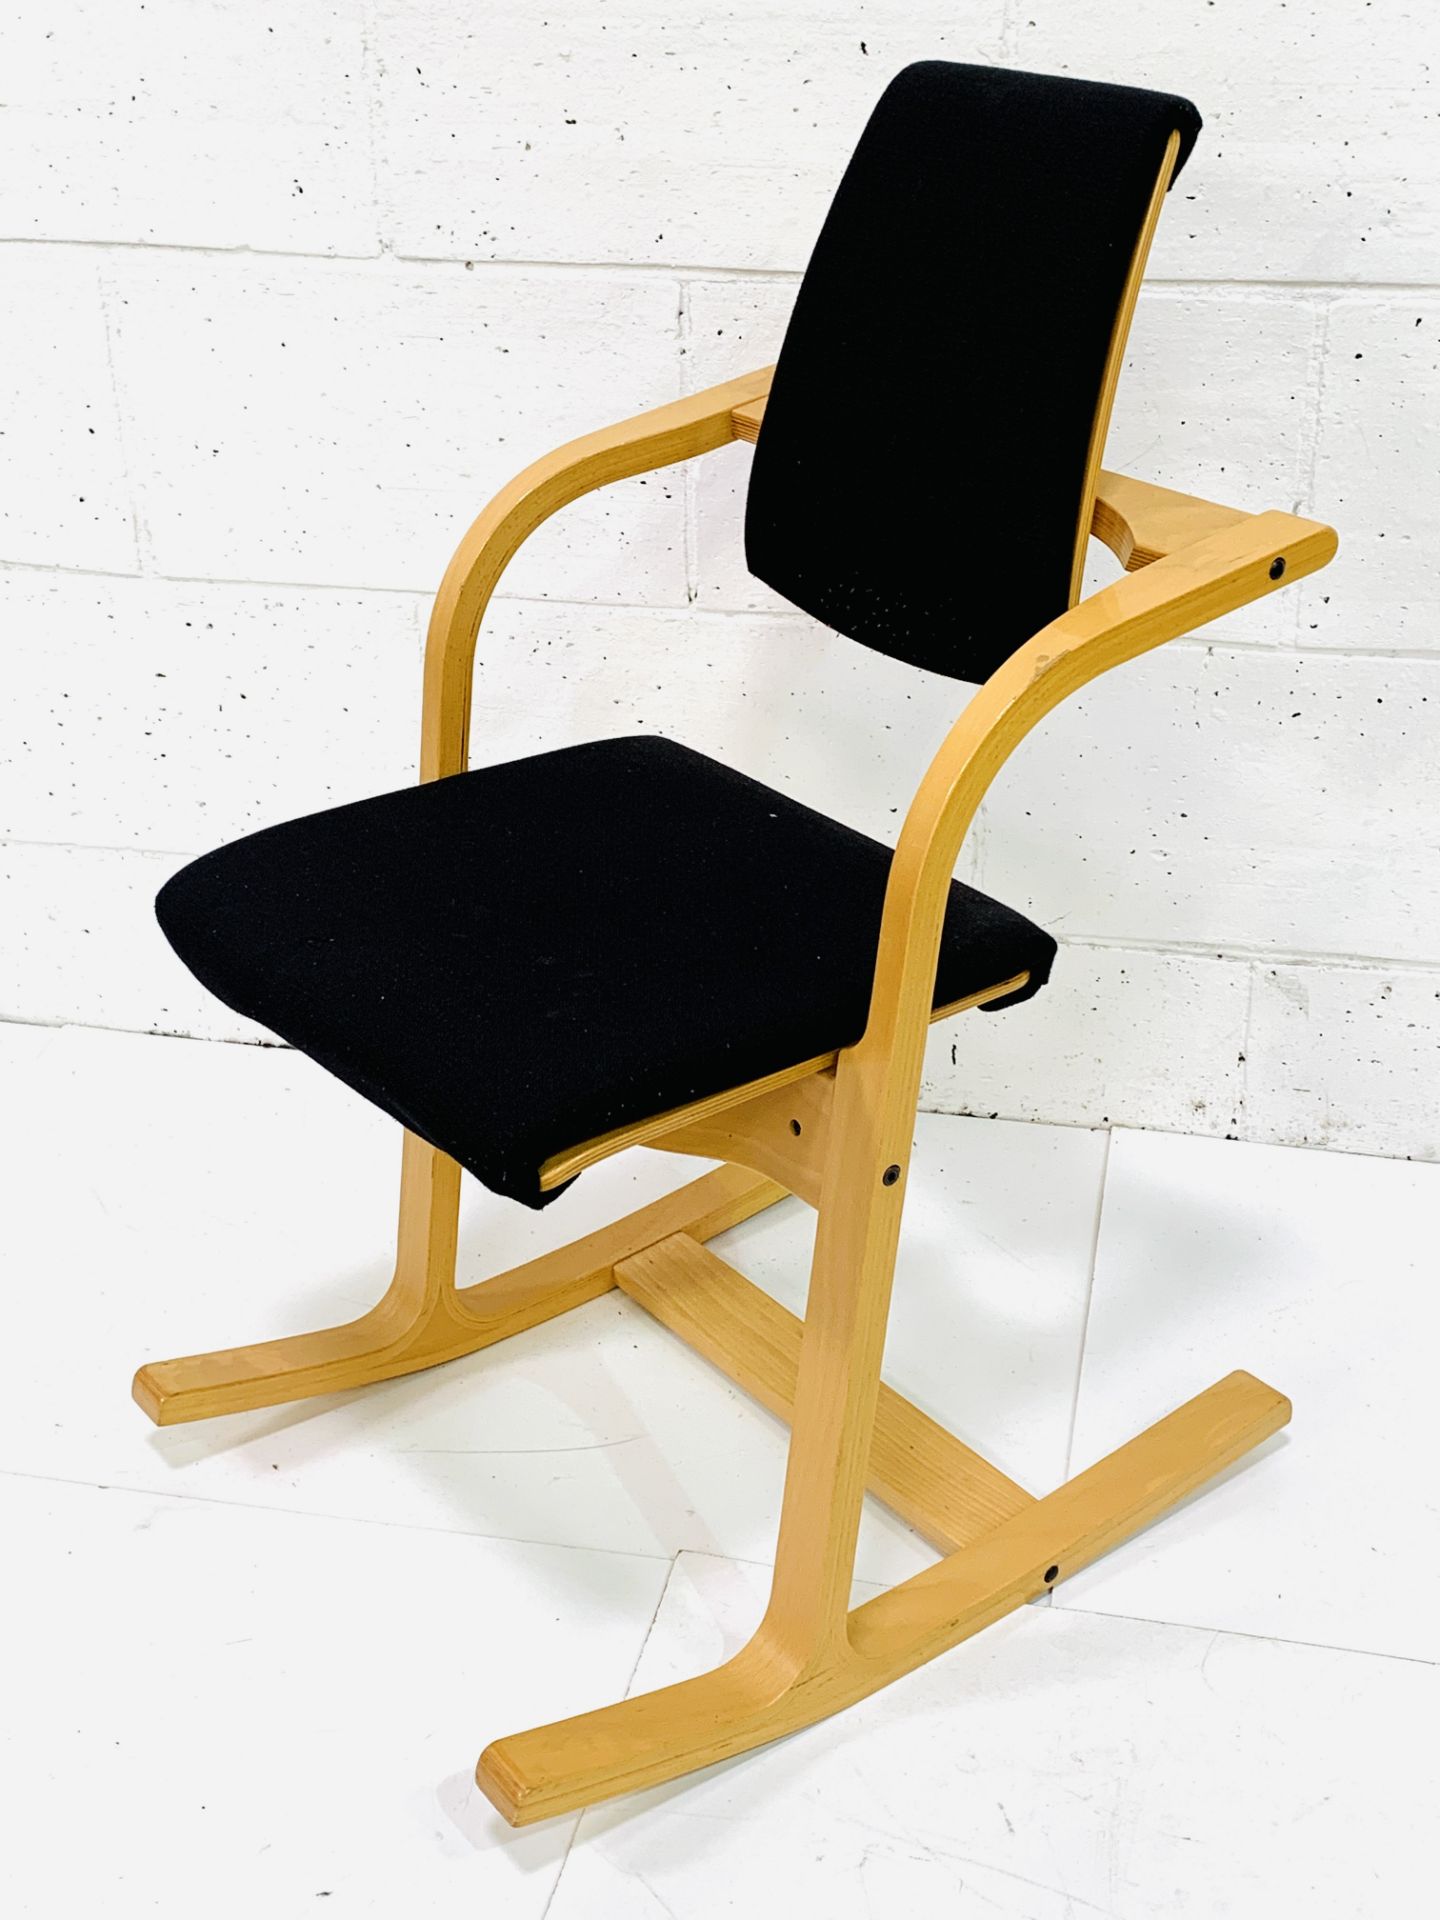 Varier Actulum 102 rocking home/office chair - Image 2 of 4